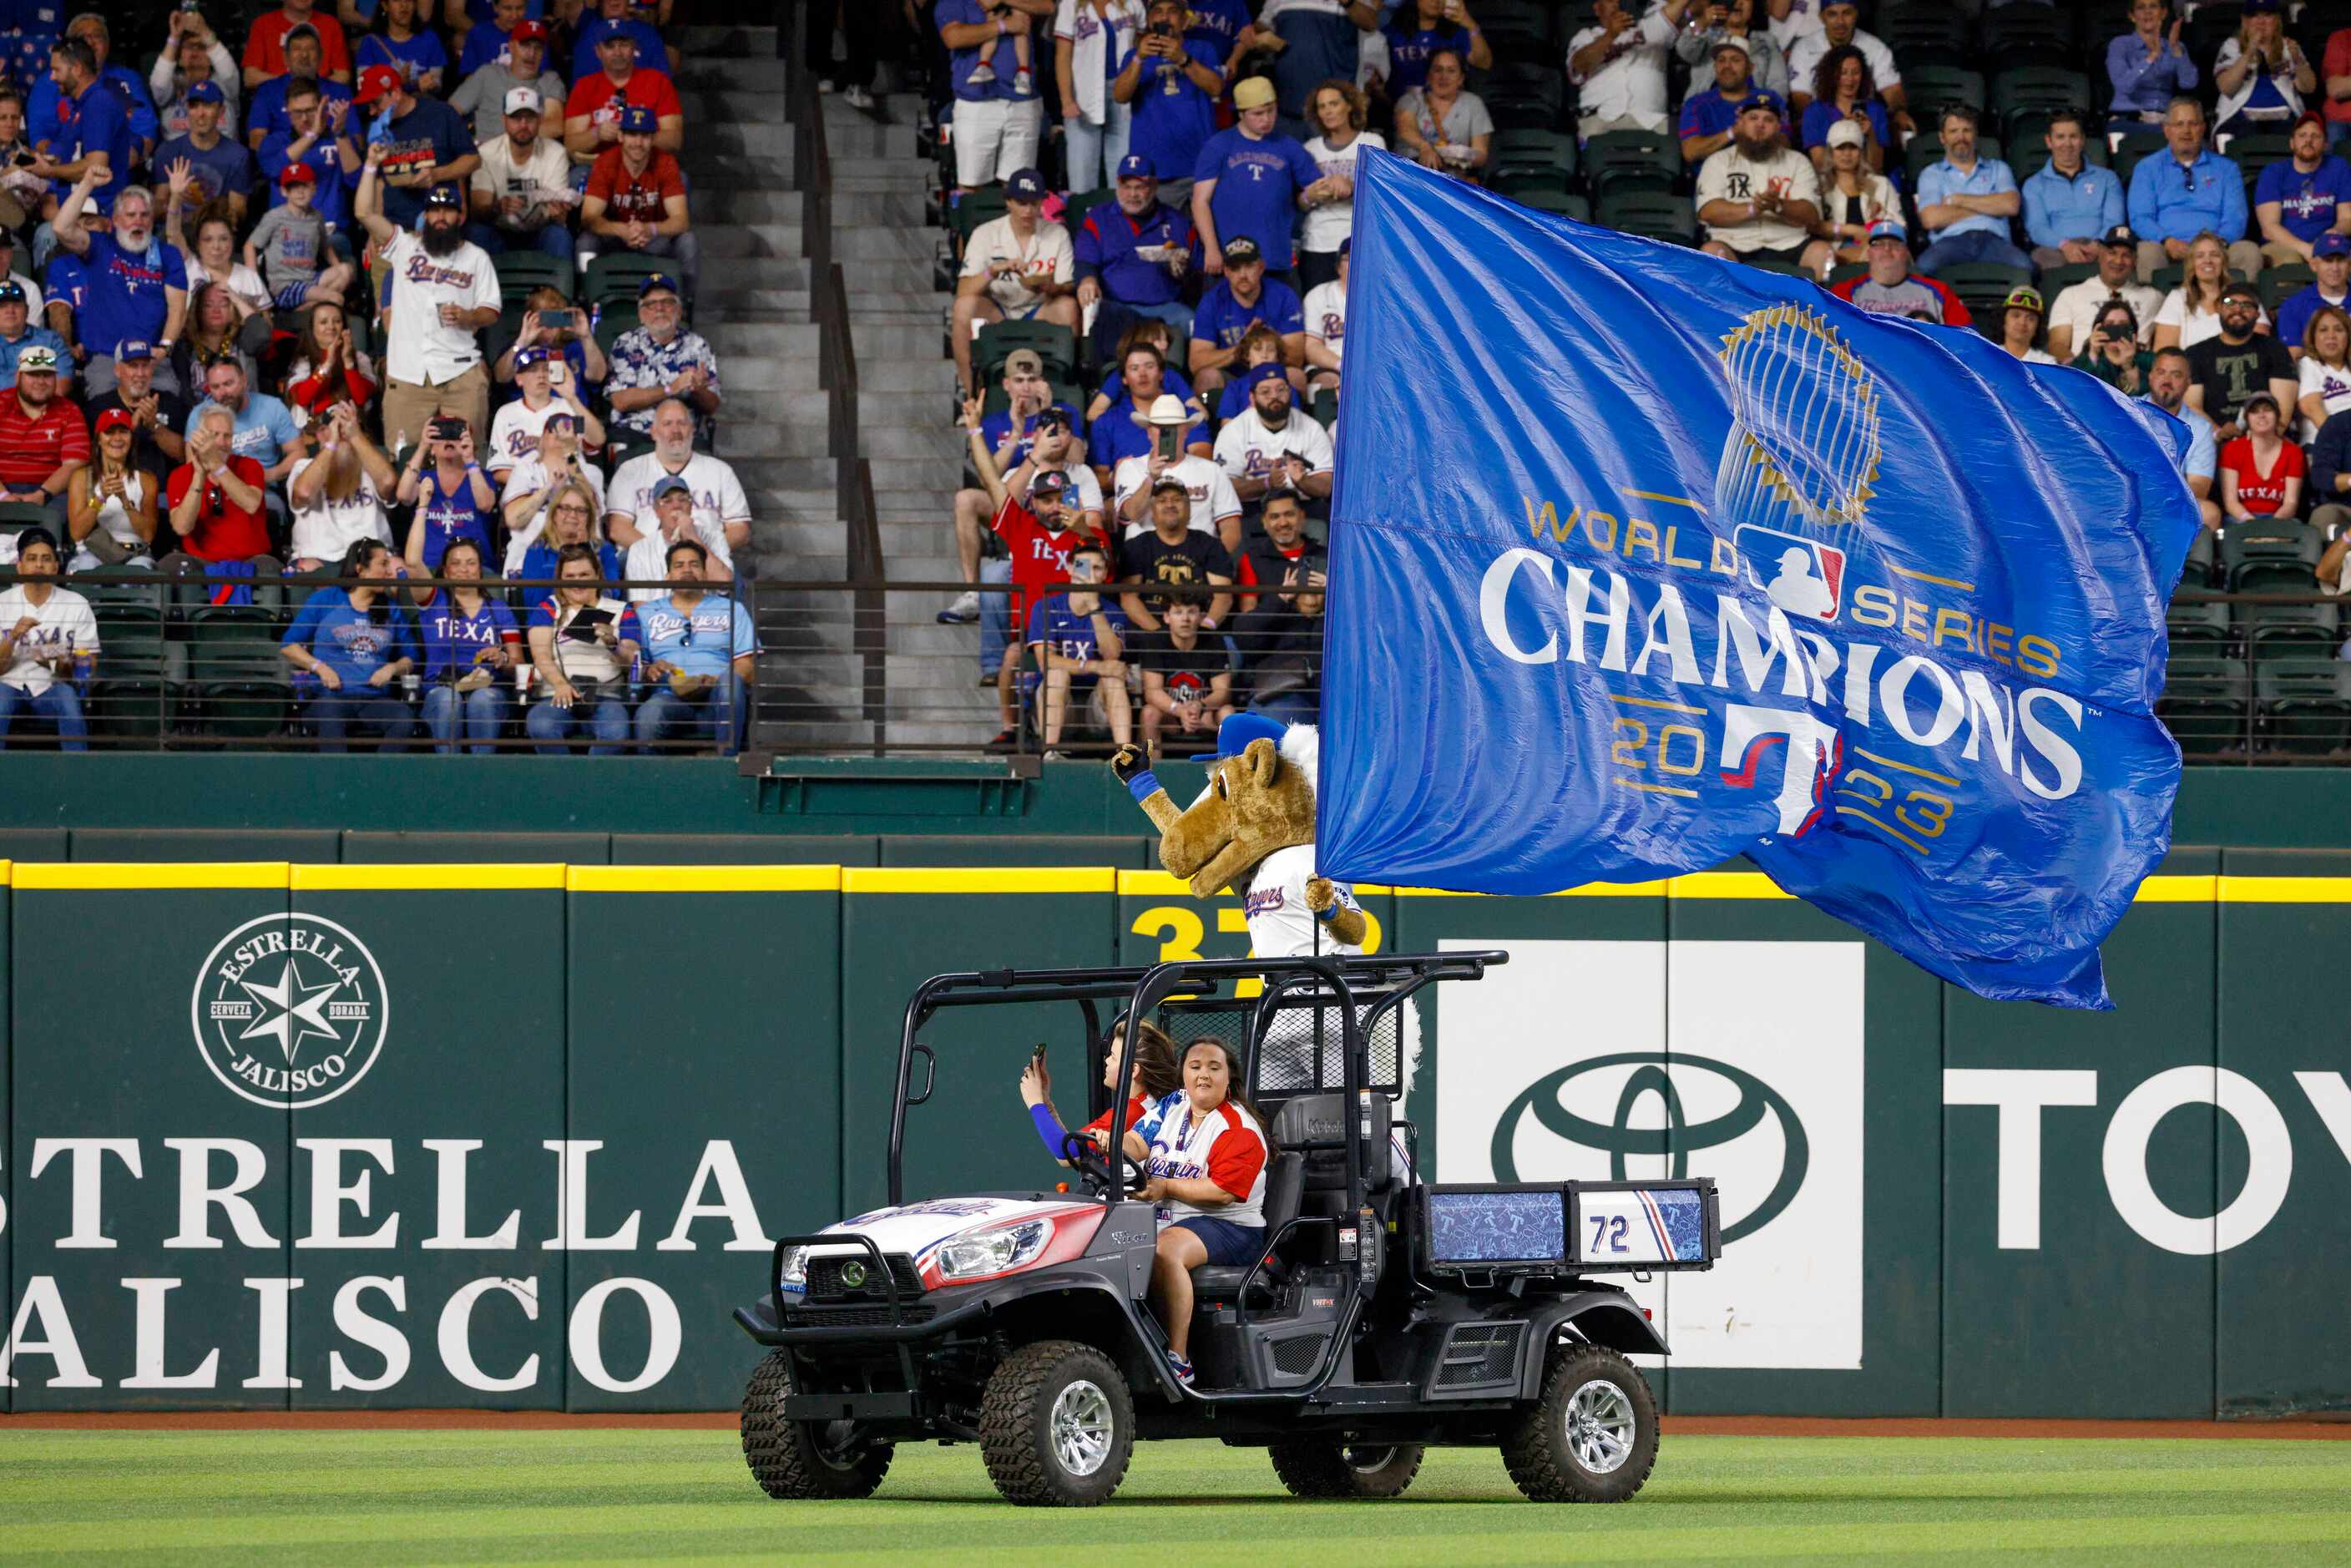 Texas Rangers mascot Captain holds a World Series Champions flag as he rides around the...